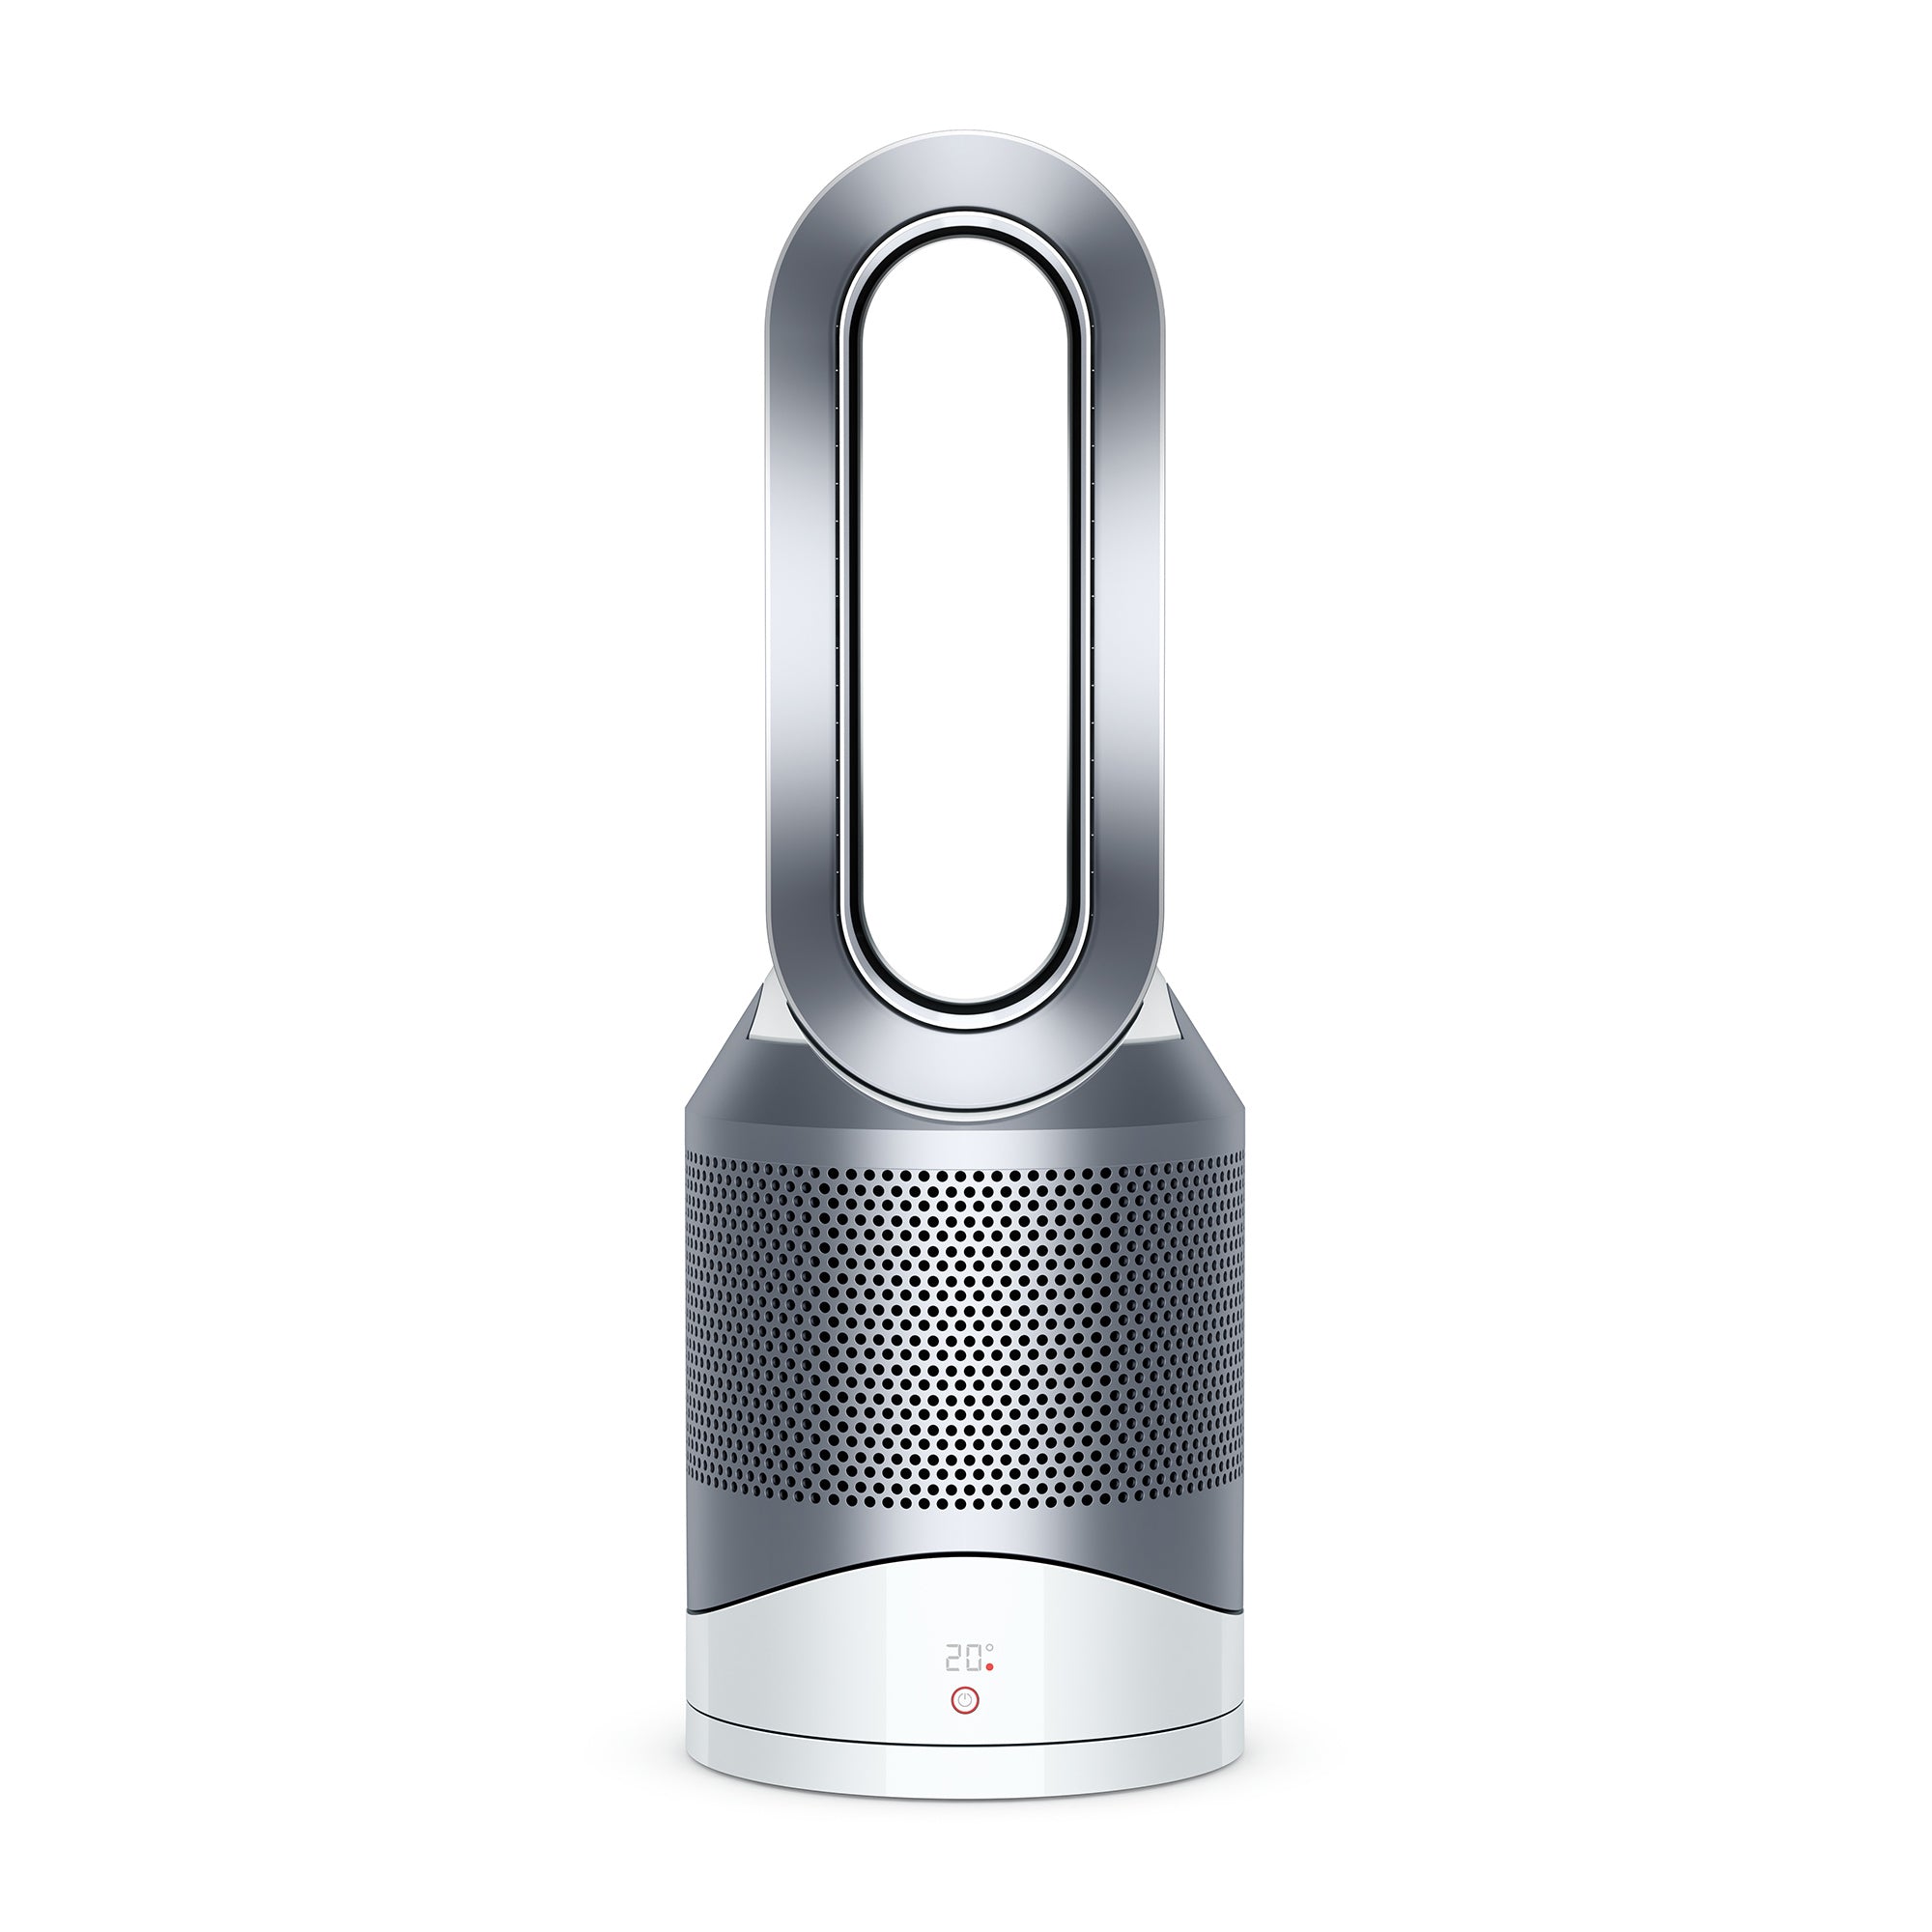 Dyson Pure Hot and Cool Purifier Fan Heater-HP00